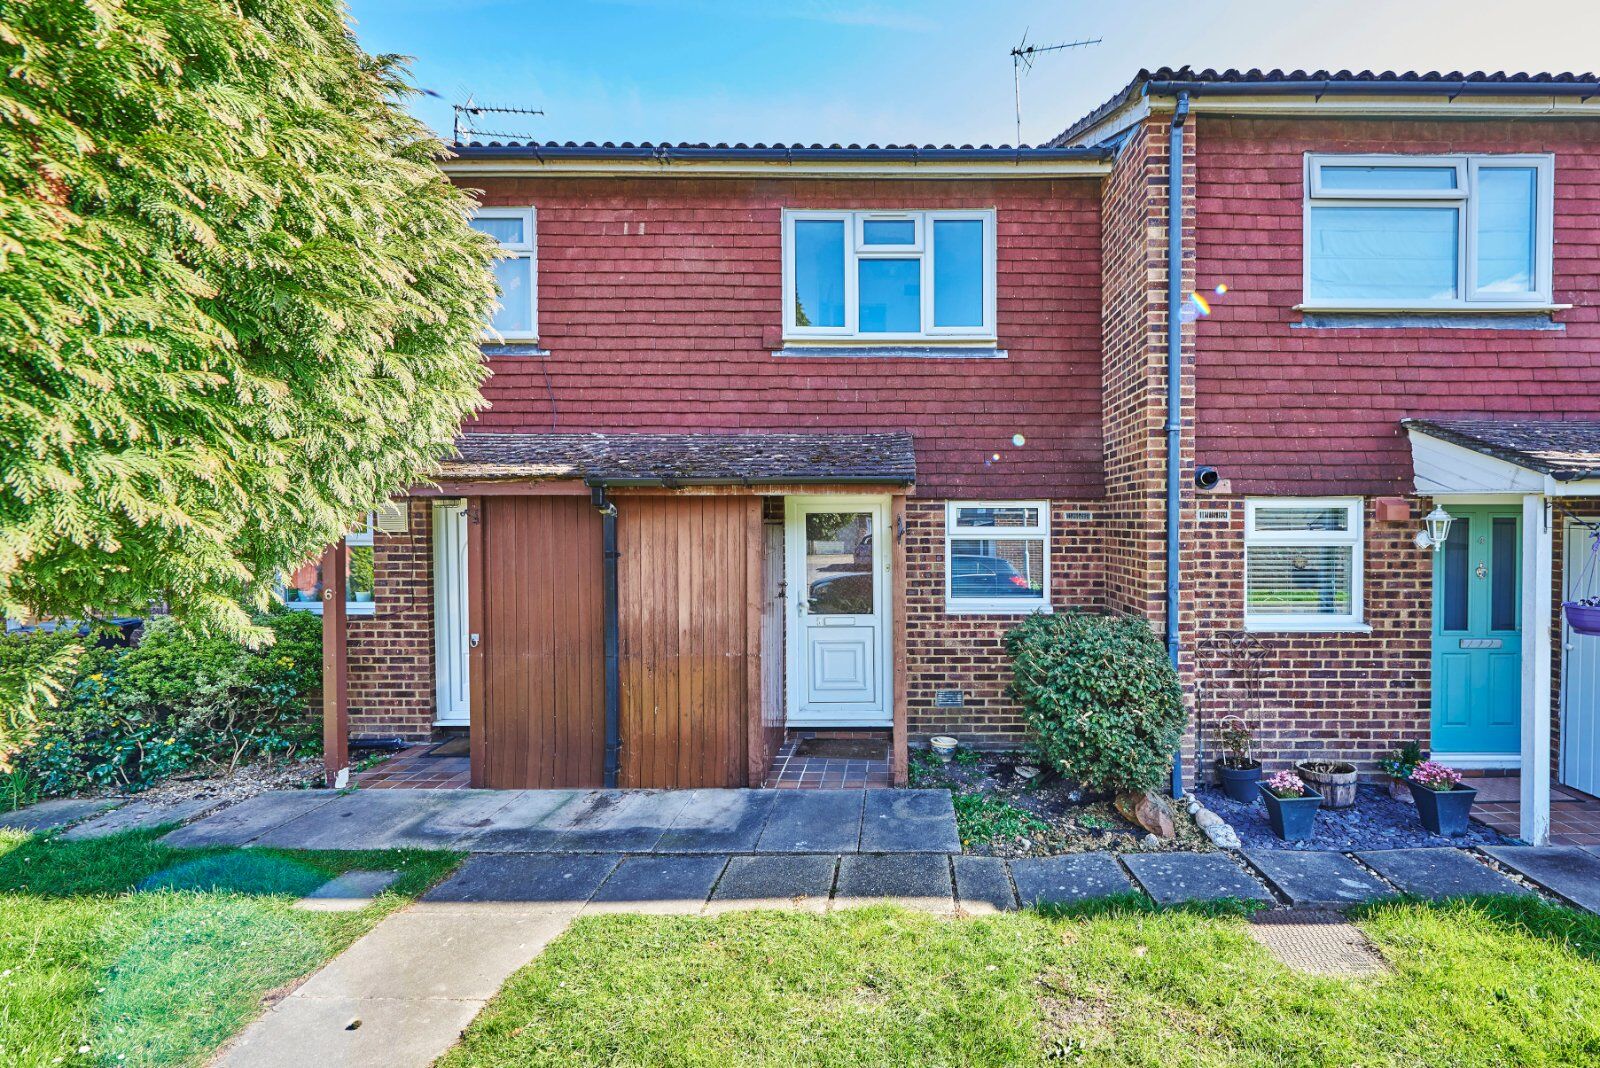 2 bedroom mid terraced house for sale Lambourn Chase, Radlett, WD7, main image